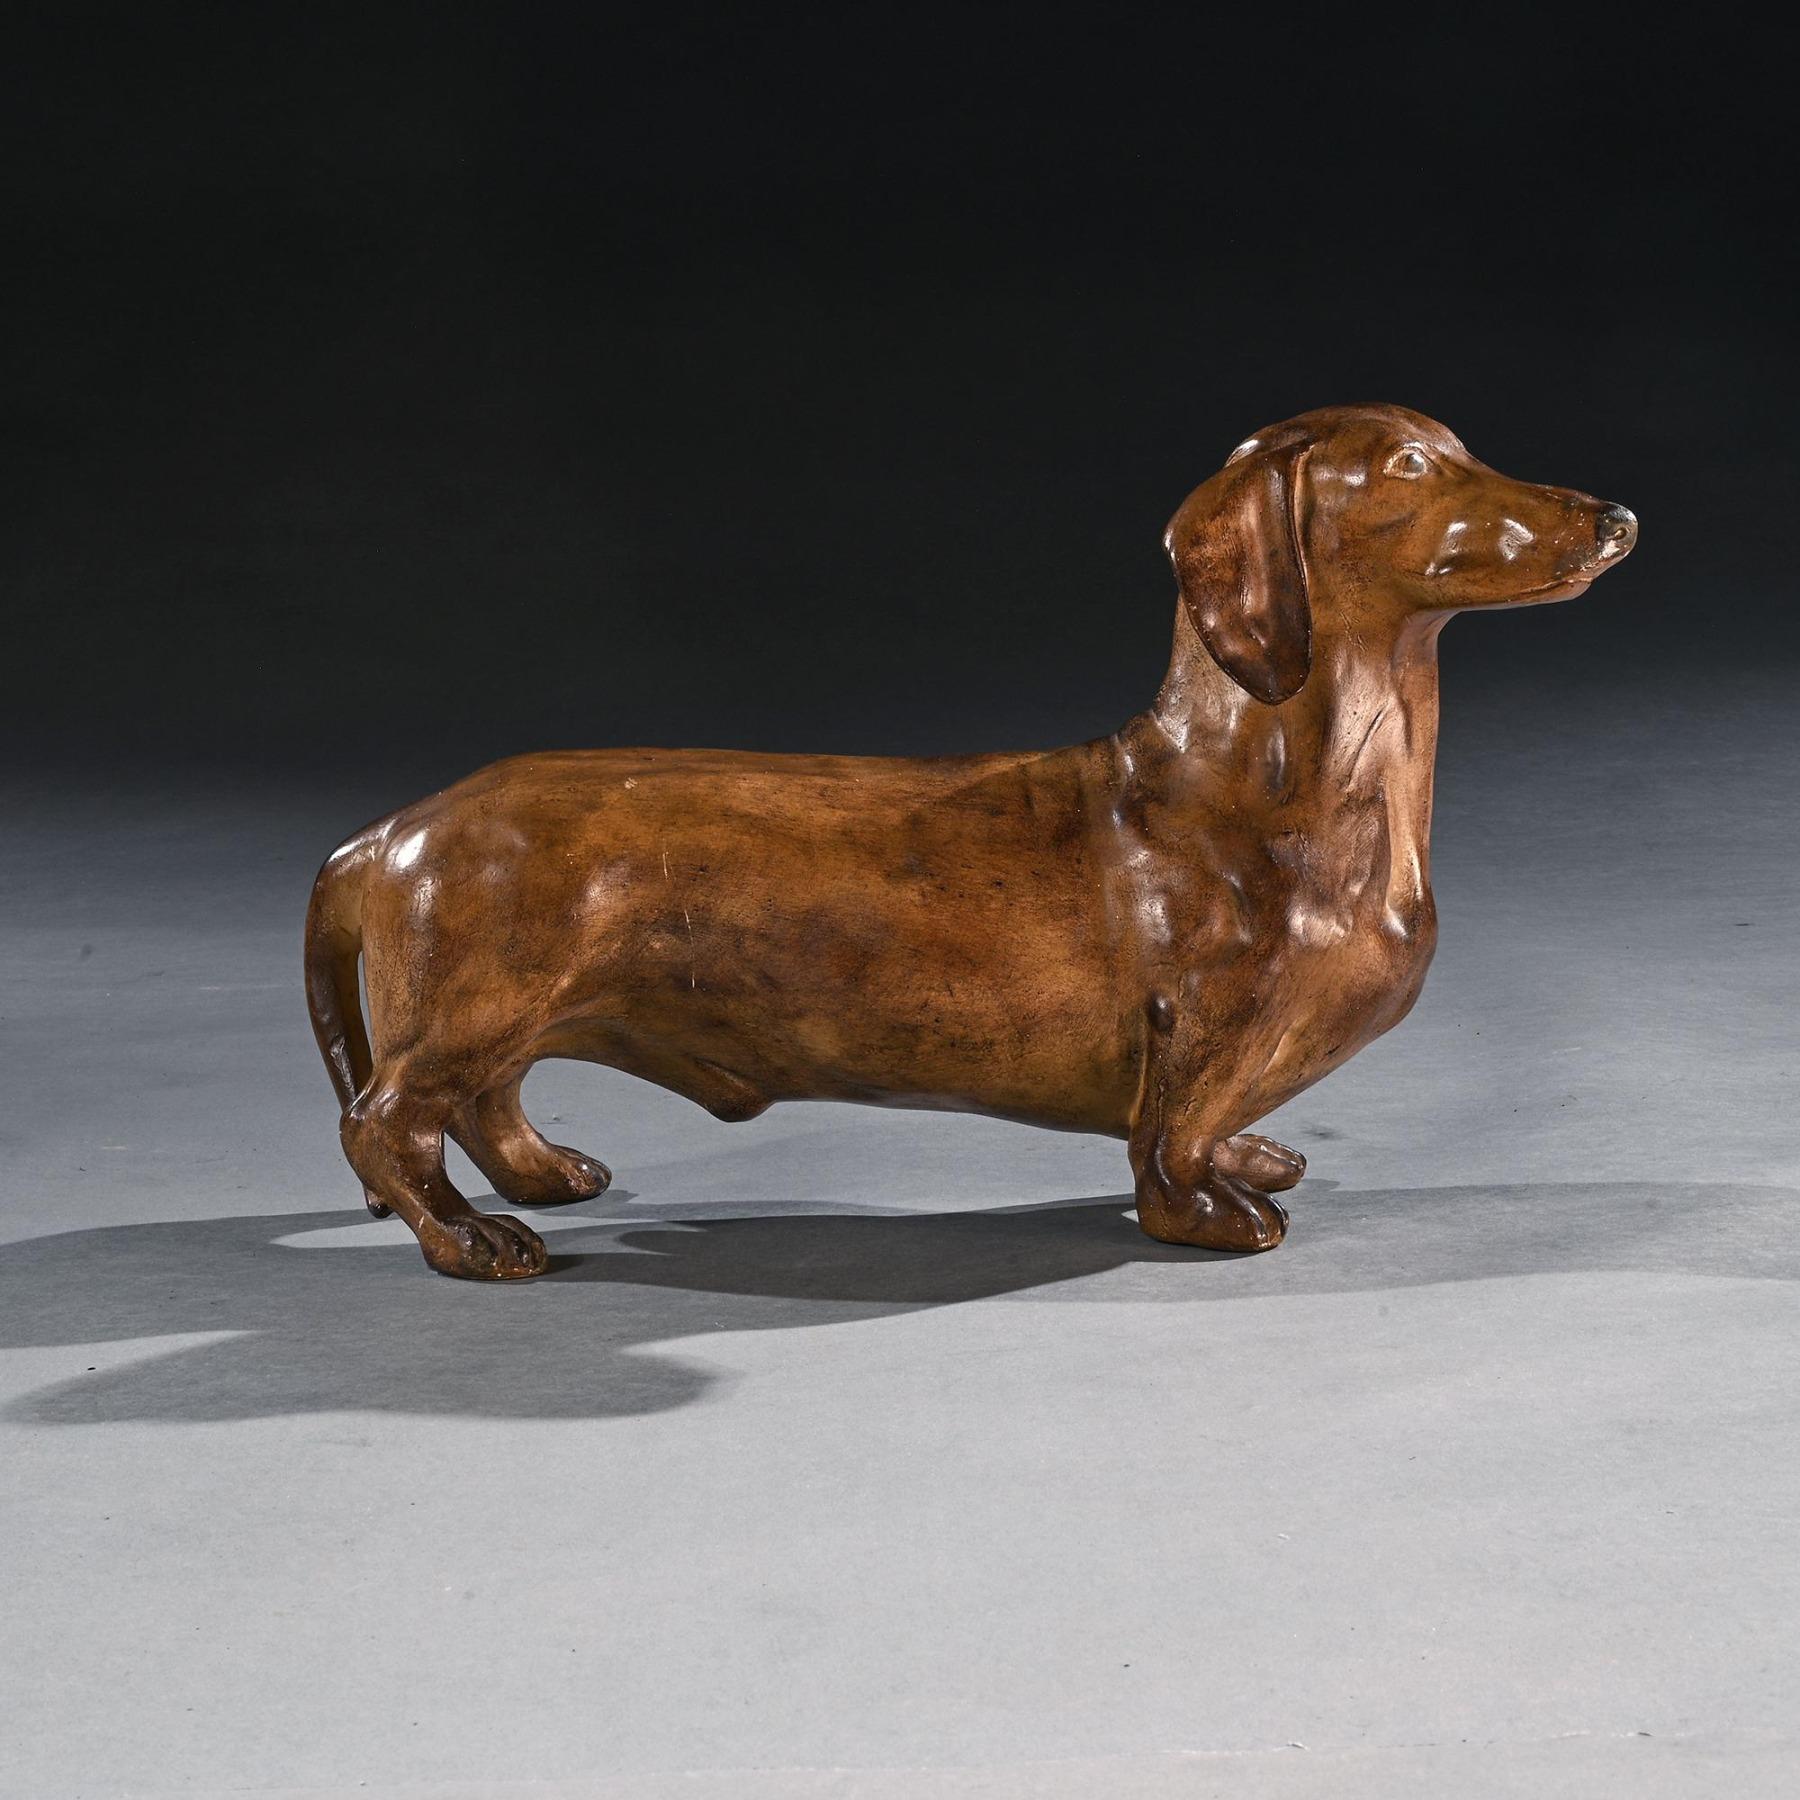 A Rare French Life-like Glazed Terracotta Sculpture of a Dachshund Dog

French Circa 1920

This charming piece depicts a Dachshund, commonly known as the sausage dog. The breed was established primarily to flush out badgers and other burrow-dwelling